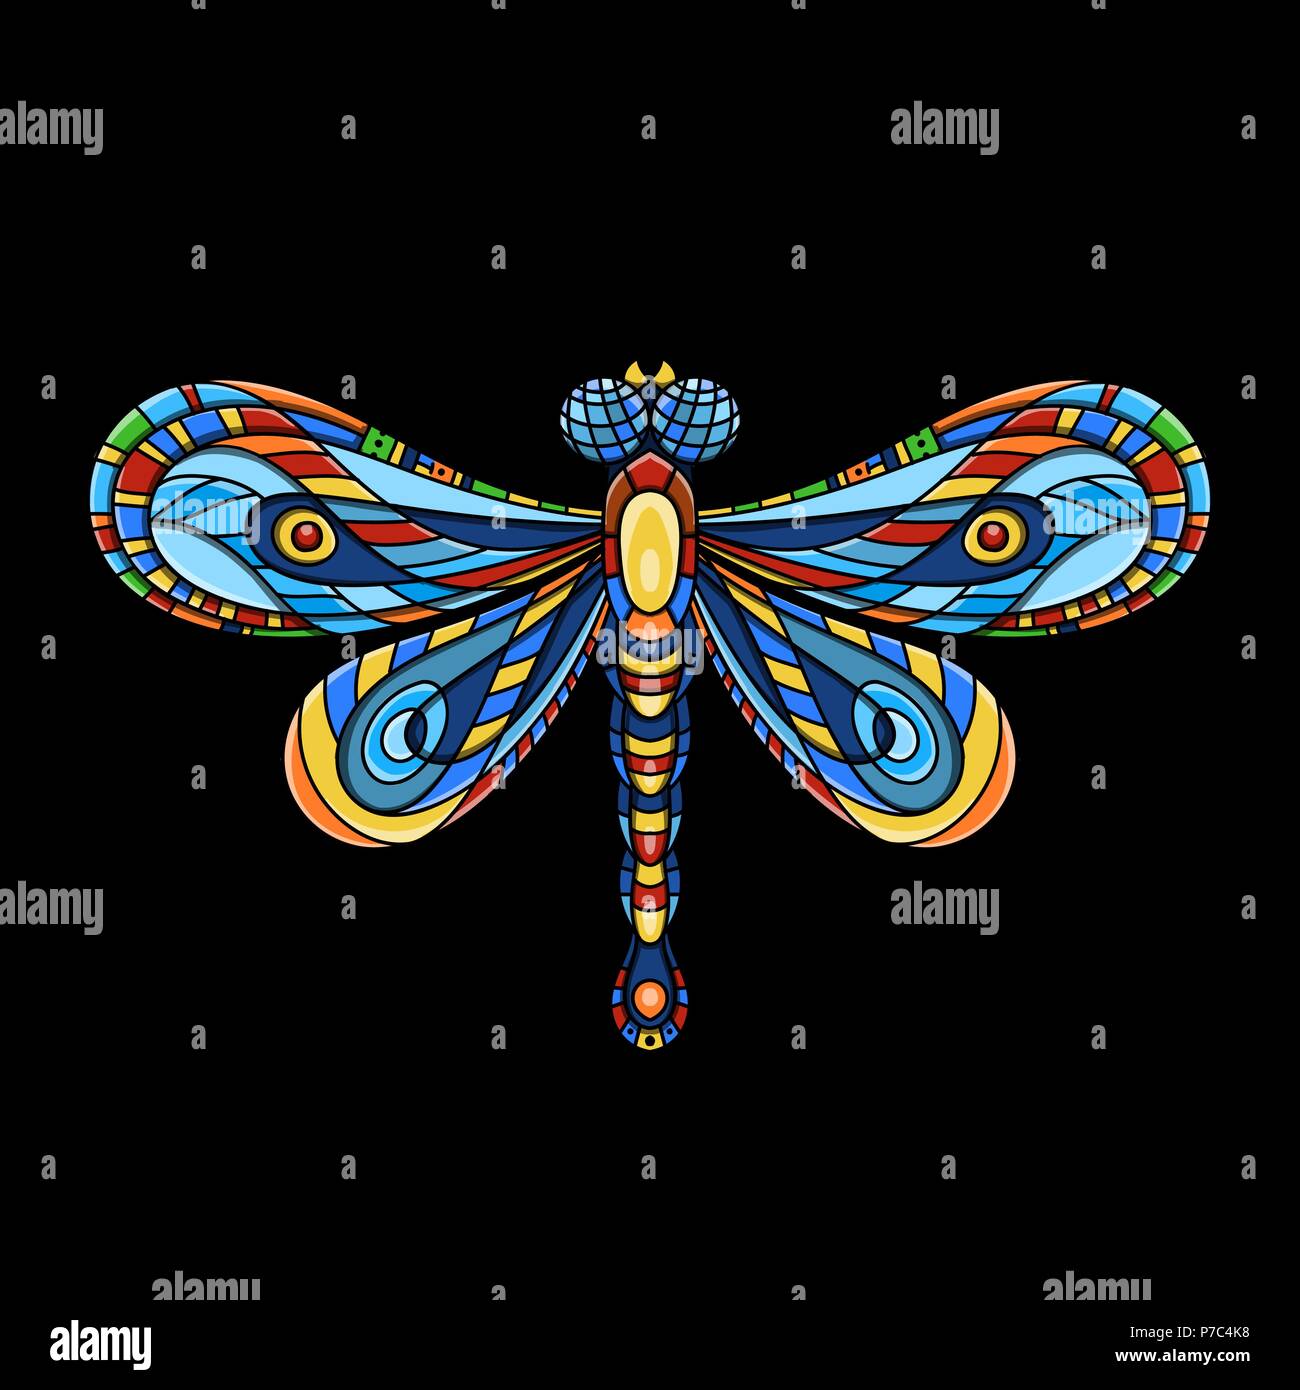 Exquisite ornate stylized dragonfly. Spiritual, esoteric, totem symbol of Africa, India, America. Ethnic tribal patterns with elements of Ar Nouveau a Stock Vector